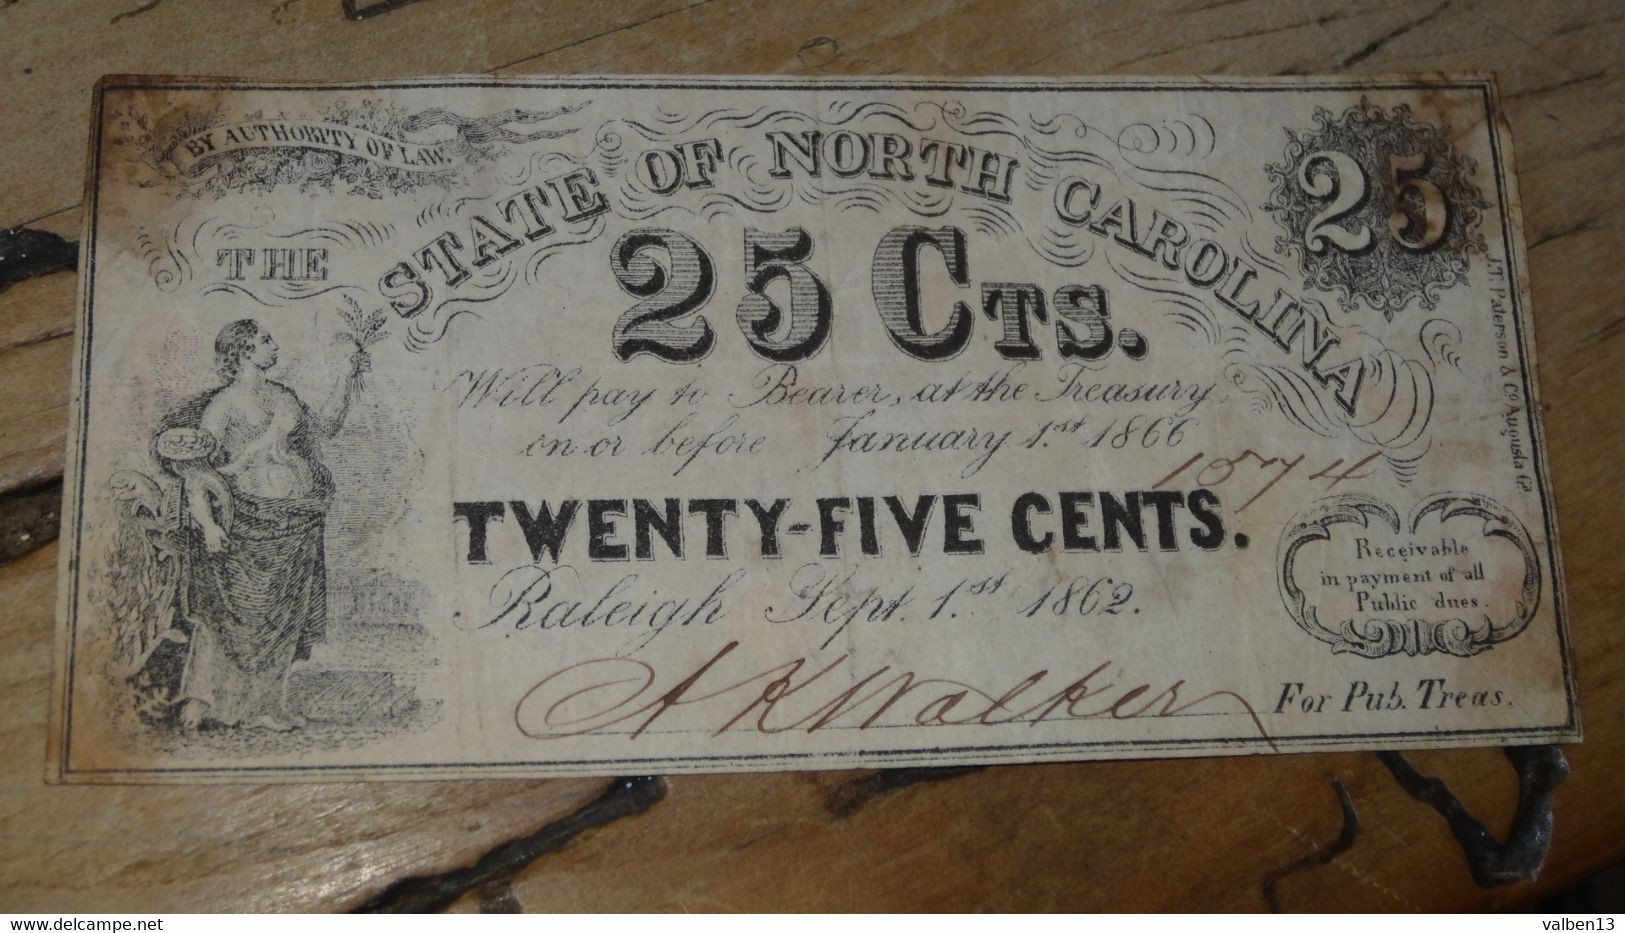 USA 25 Cents 1862 State North Carolina Raleigh  ............ CL-2-2 - Confederate Currency (1861-1864)